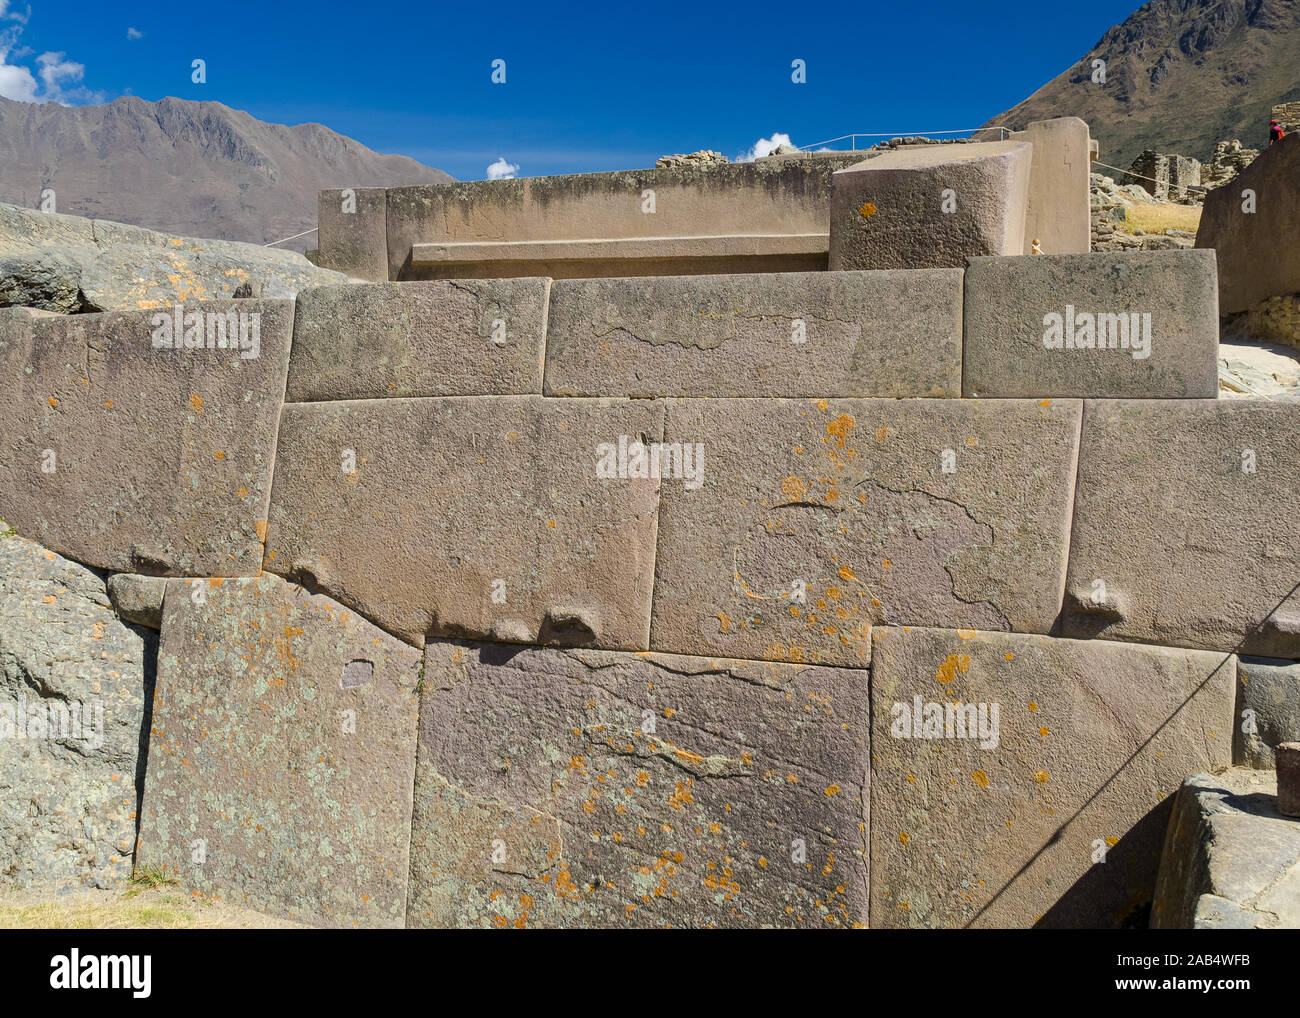 Ollantaytambo ruins, a massive Inca fortress with large stone terraces on a hillside Stock Photo